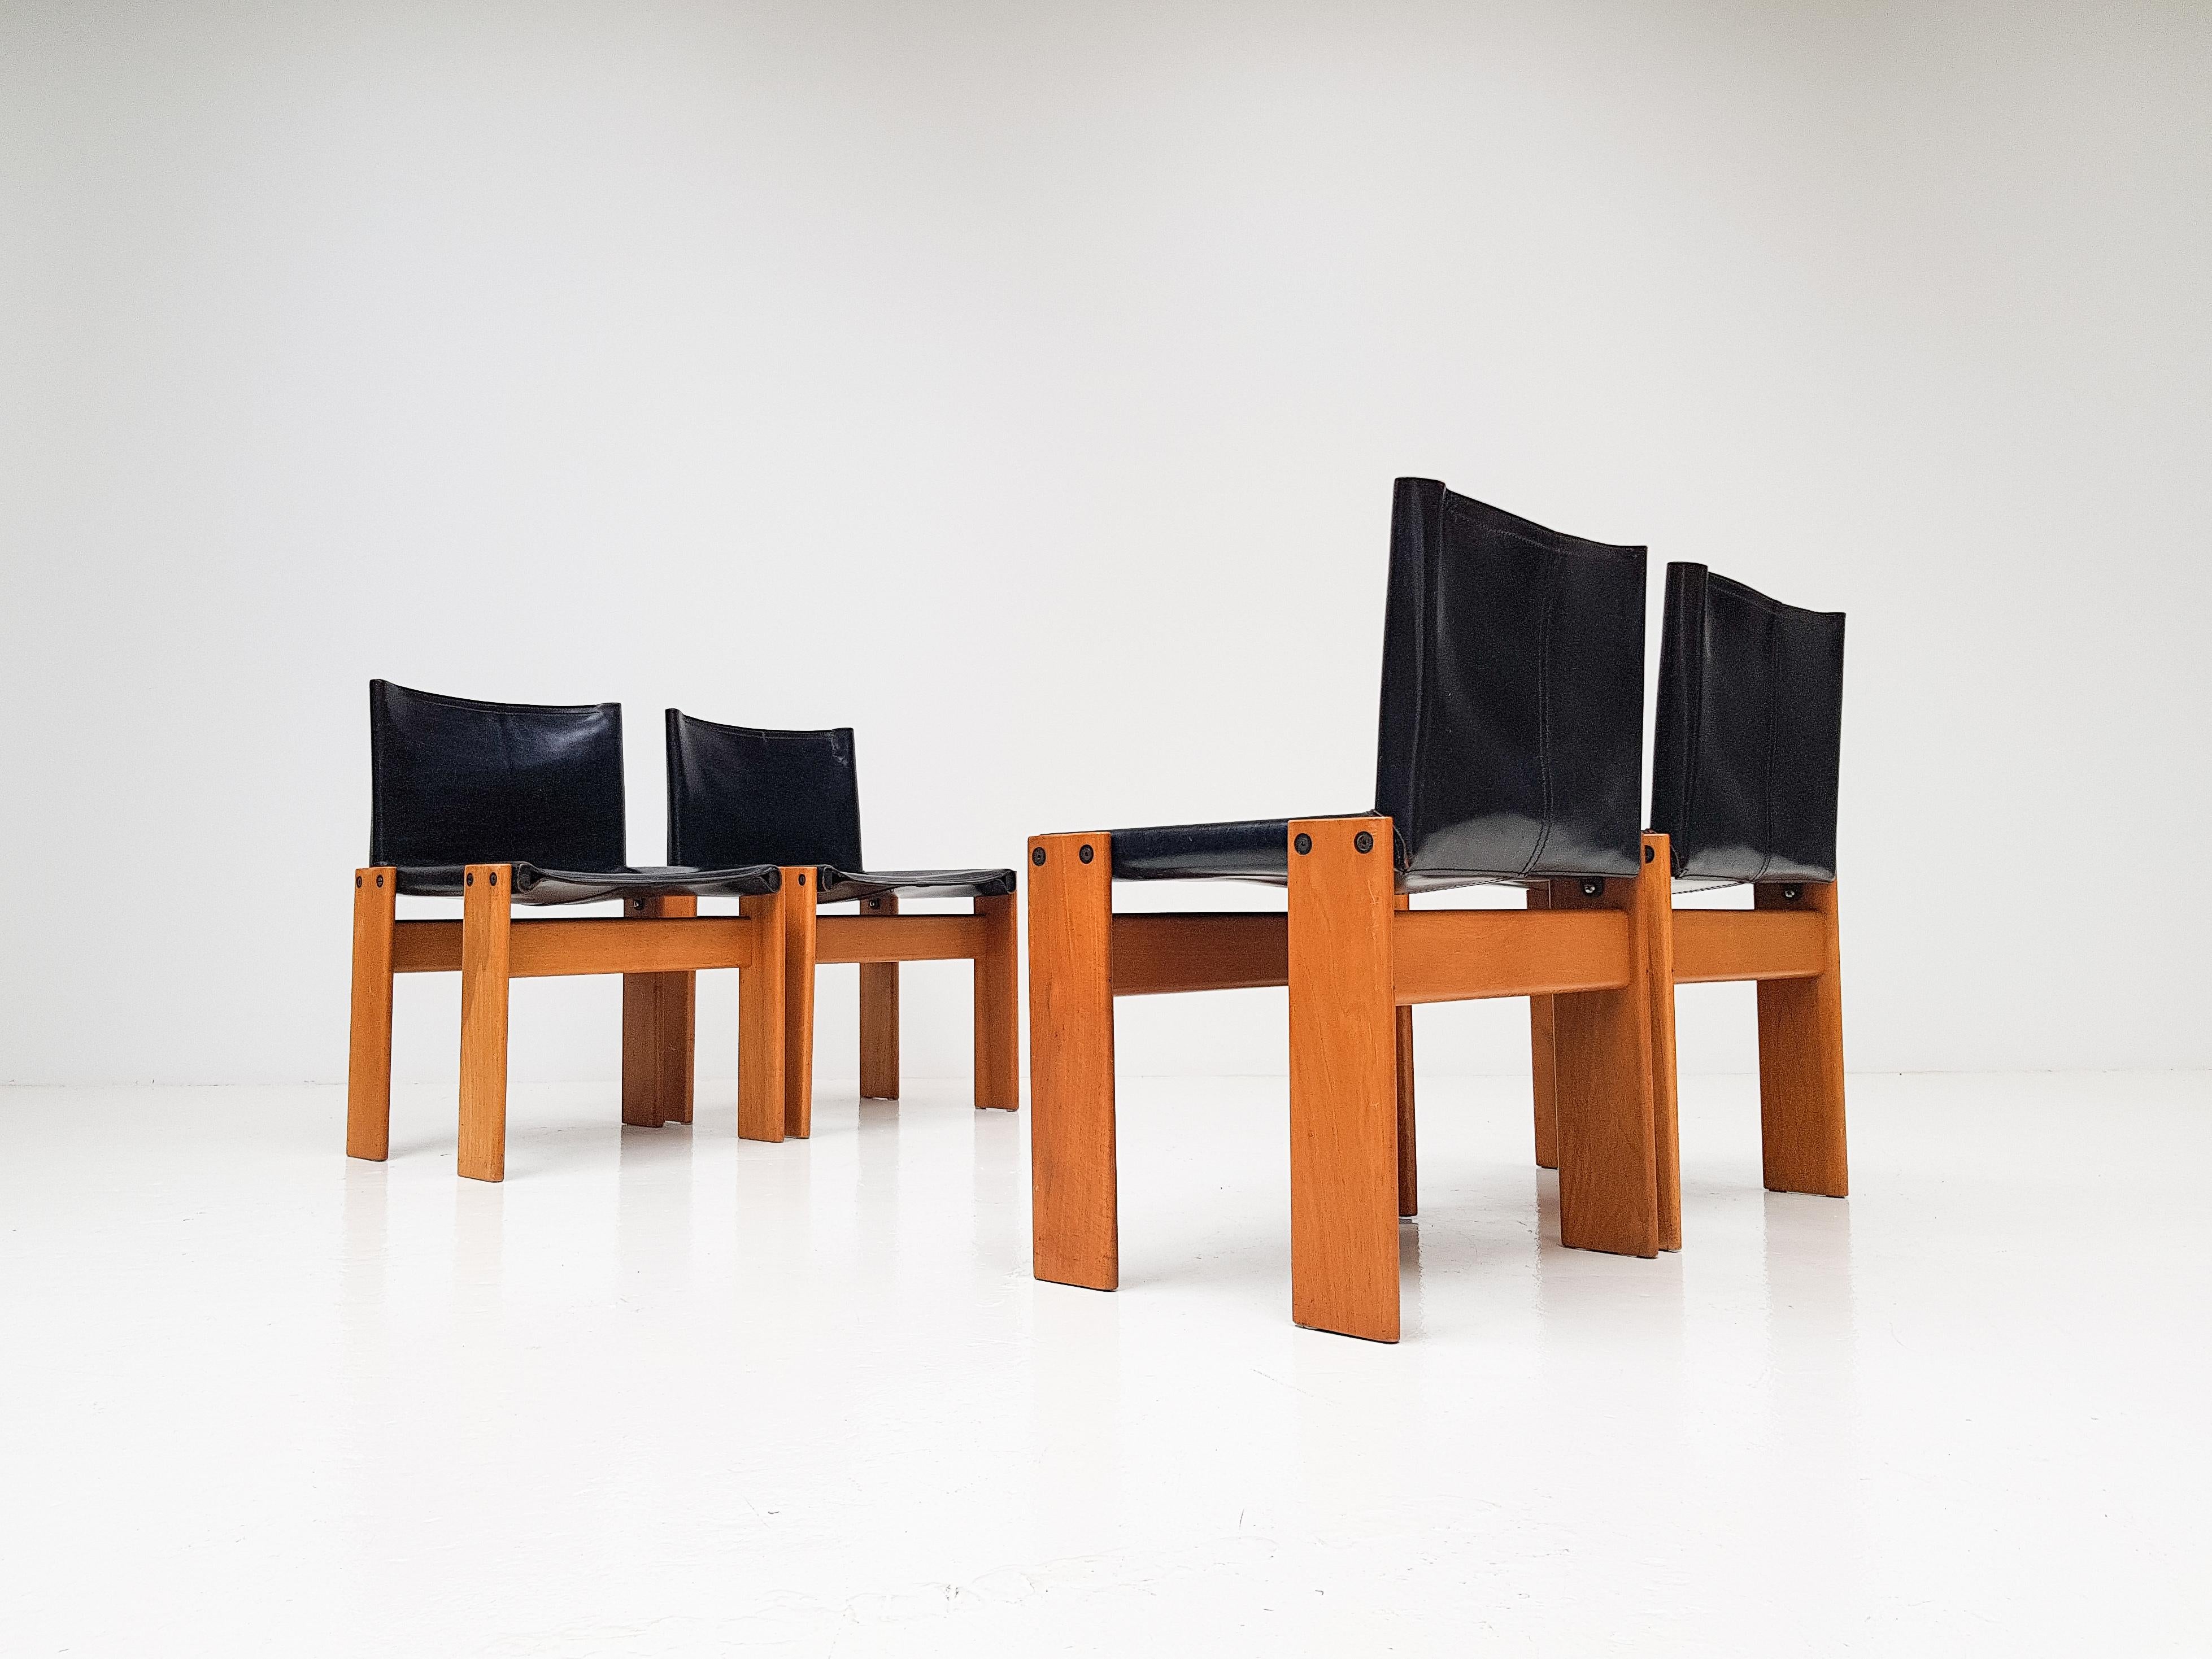 A set of 'Monk' dining chairs by Italian award-winning designer couple Afra & Tobia Scarpa. 

Patinated beech and thick black saddle leather the design is high-quality, minimal and solid. Manufactured by Molteni, Italy, 1974. 

A stunning set.

We